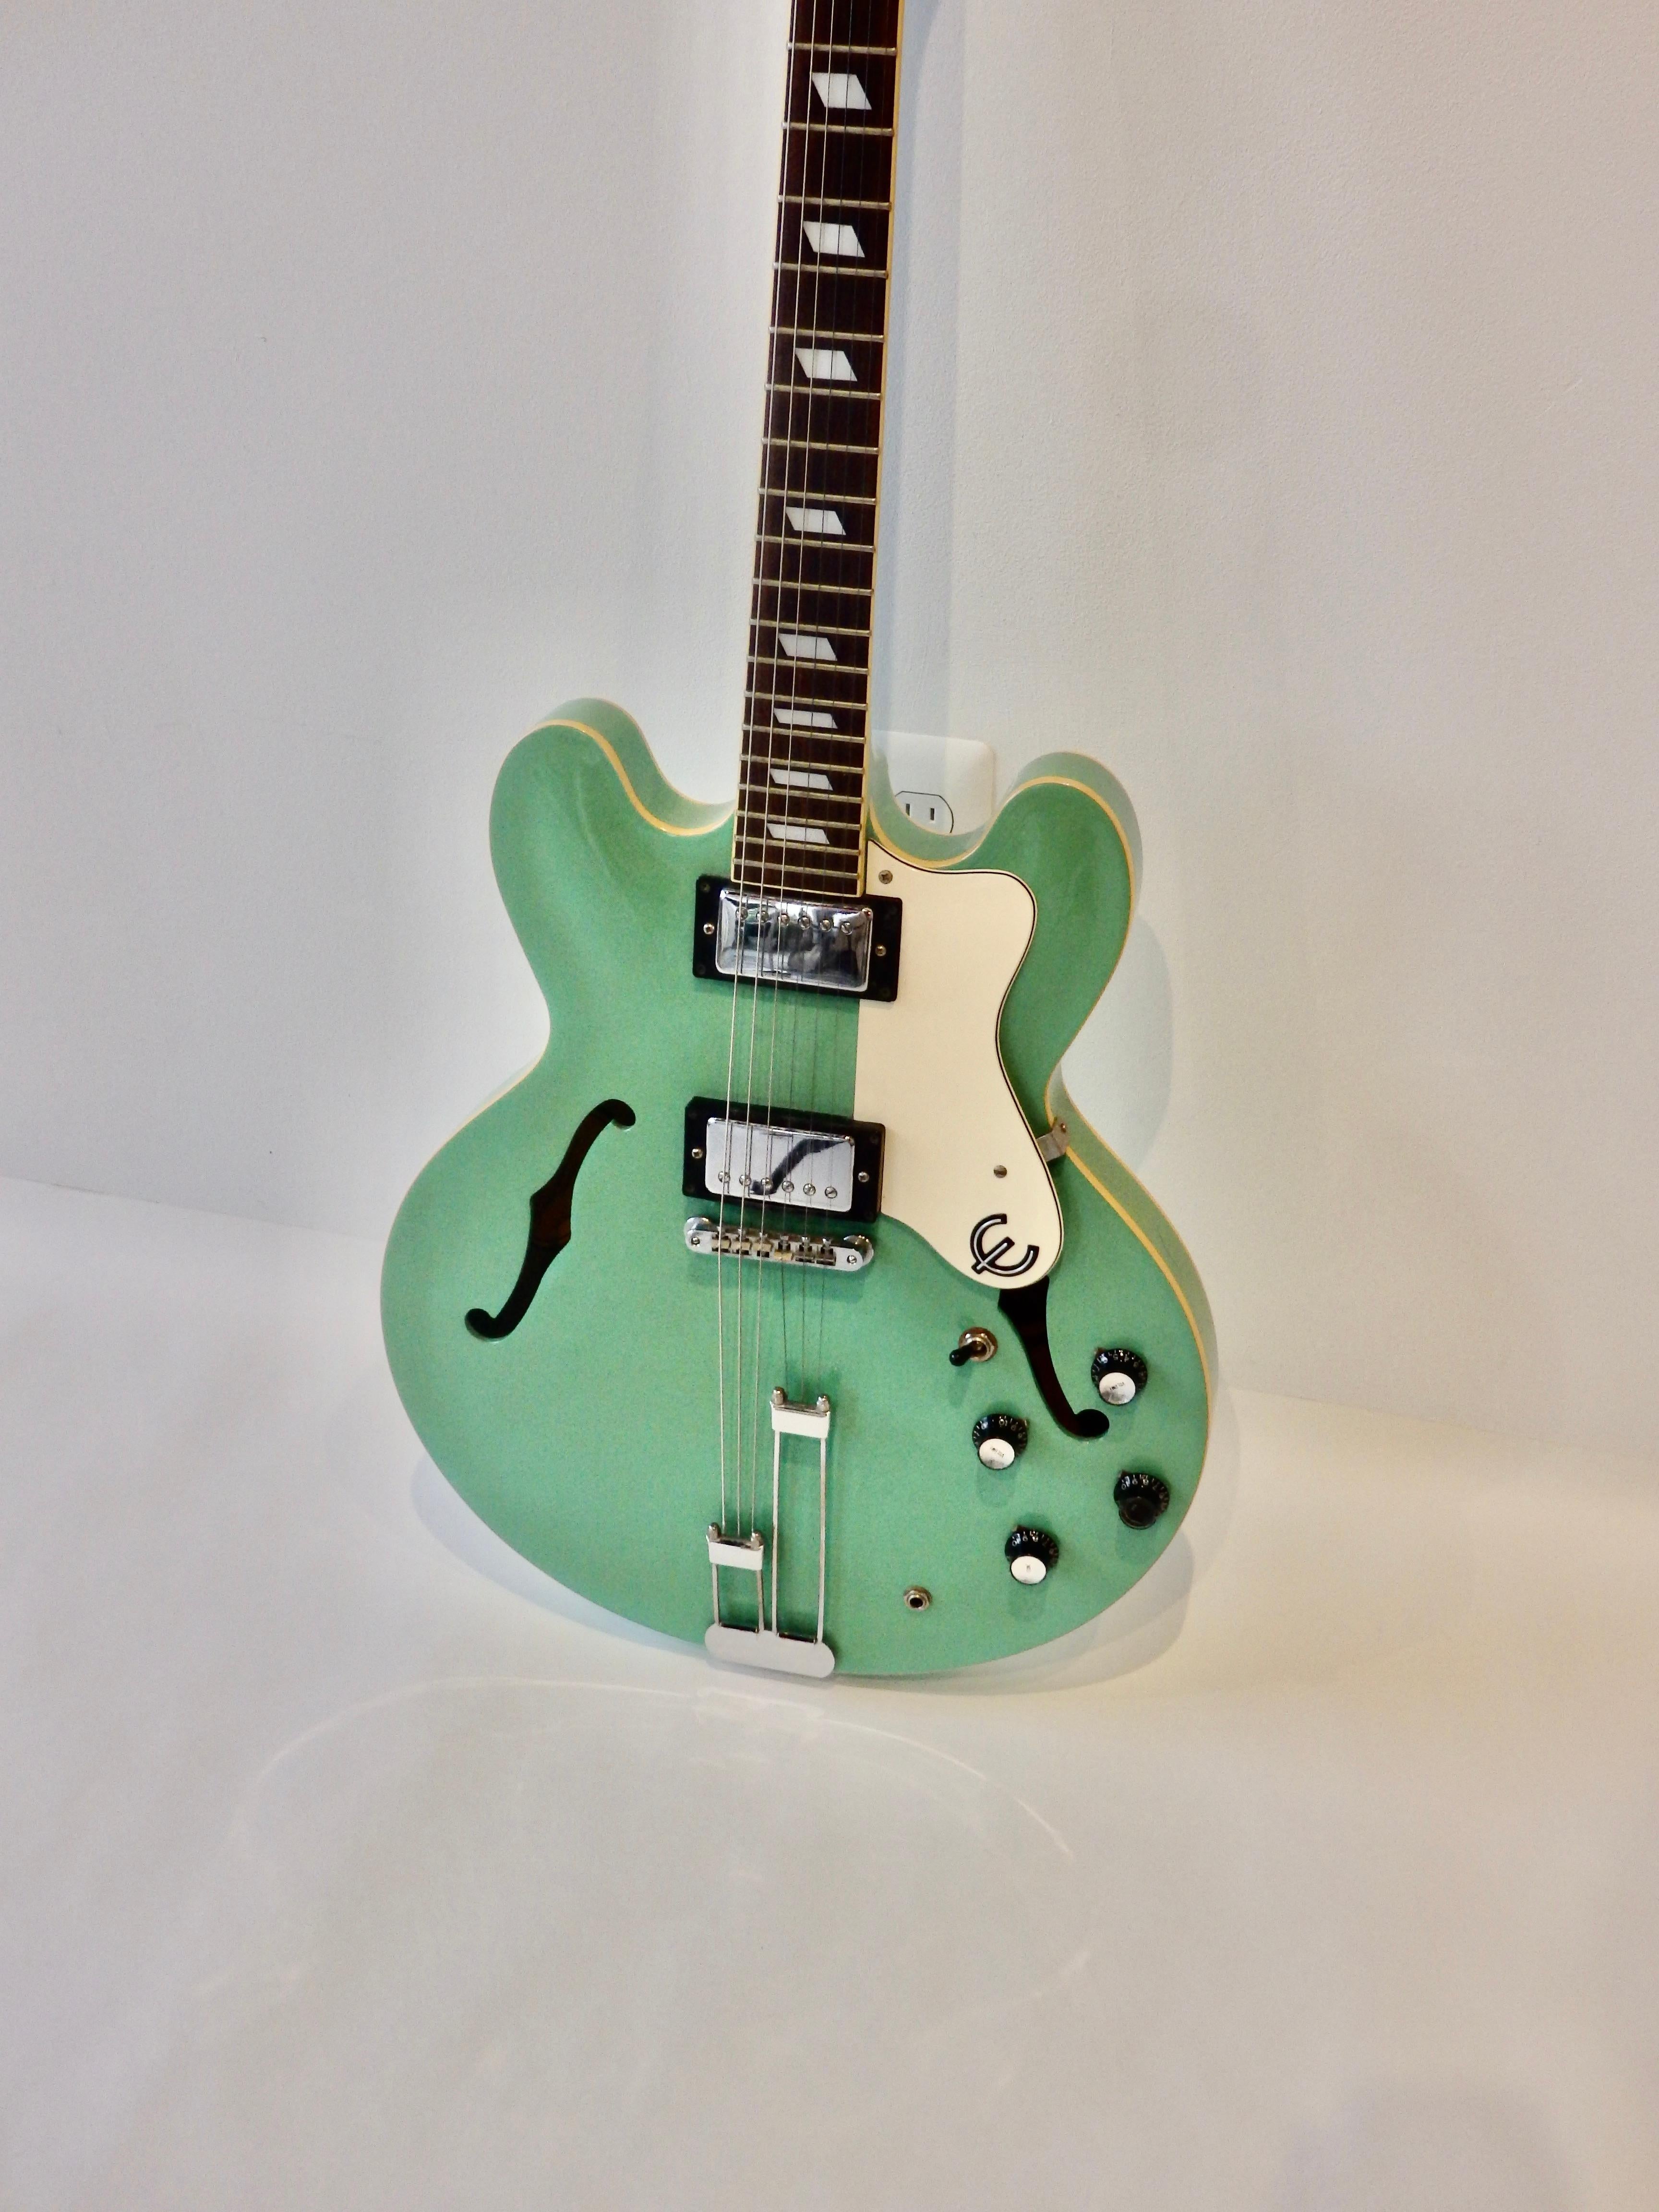 1996 Epiphone Riviera electric guitar with original case. Mint chocolate chip green. Produced at Peerless, Korean Factory, June 1996, serial number R96P1415, Humbucker pickups, hardshell case, amp power cord. Working condition. 1 and 5/8 nut at top